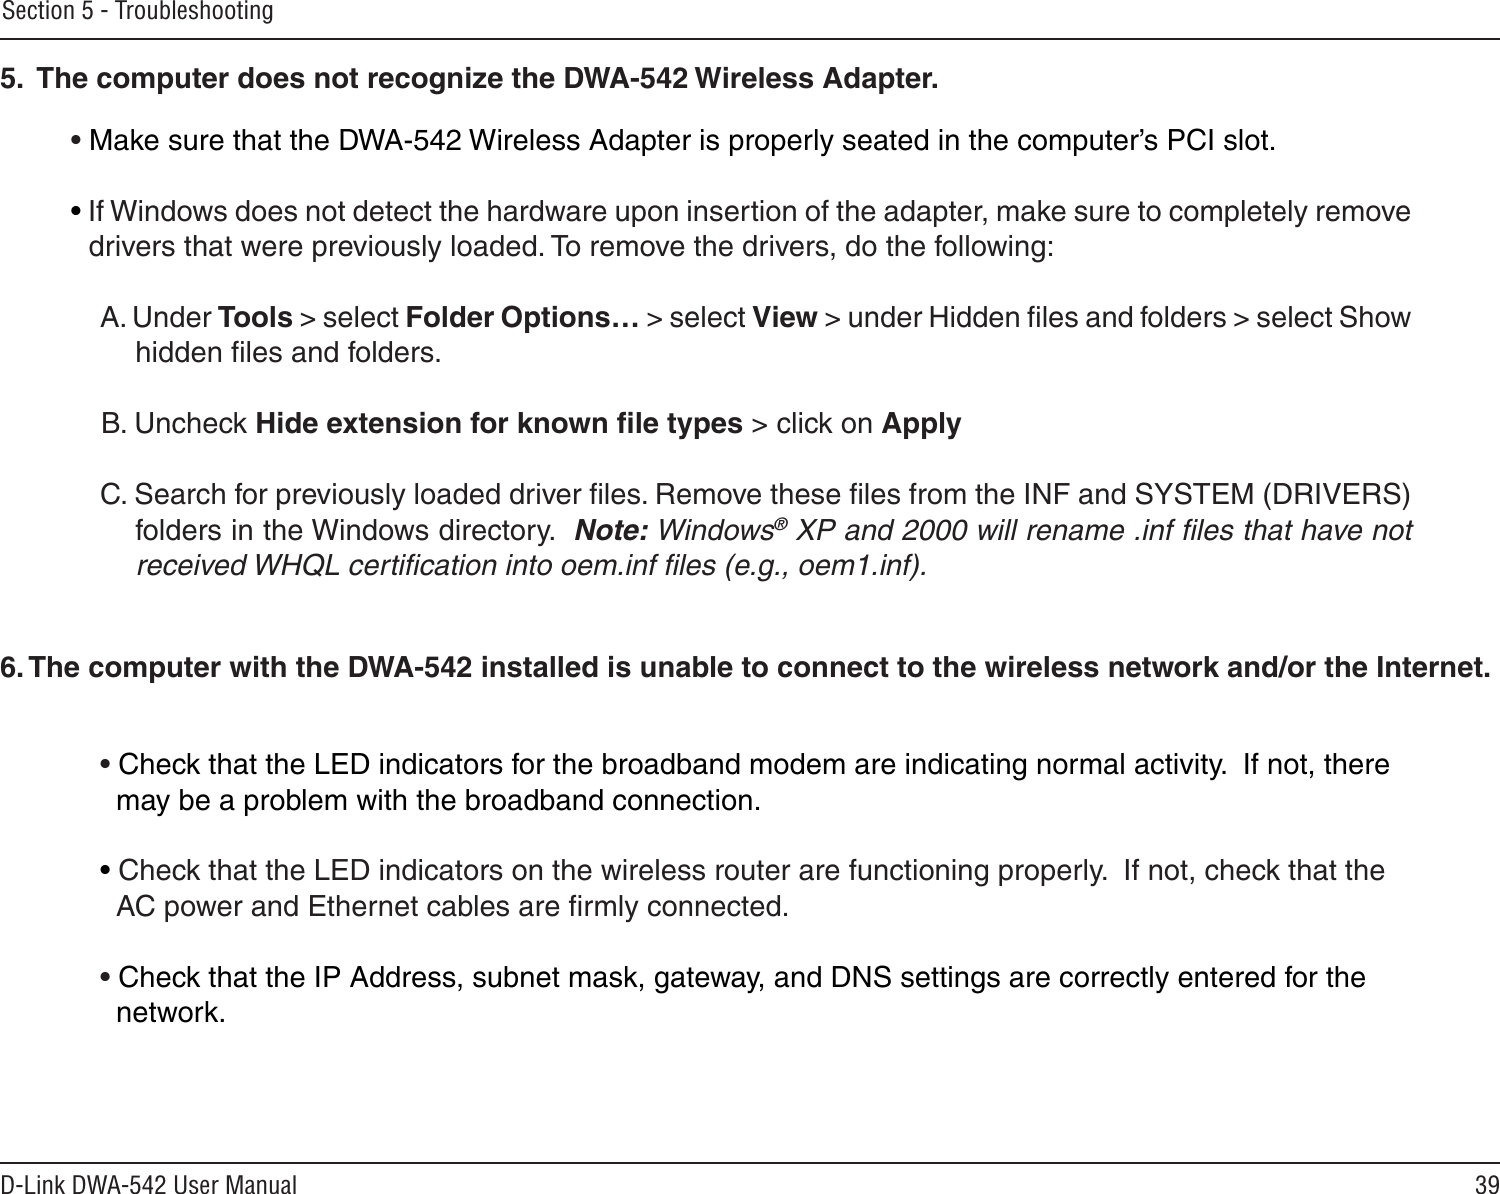 39D-Link DWA-542 User ManualSection 5 - Troubleshooting• Make sure that the DWA-542 Wireless Adapter is properly seated in the computer’s PCI slot.• If Windows does not detect the hardware upon insertion of the adapter, make sure to completely remove drivers that were previously loaded. To remove the drivers, do the following:A. Under Tools &gt; select Folder Options… &gt; select View &gt; under Hidden ﬁles and folders &gt; select Show  hidden ﬁles and folders.B. Uncheck Hide extension for known ﬁle types &gt; click on ApplyC. Search for previously loaded driver ﬁles. Remove these ﬁles from the INF and SYSTEM (DRIVERS) folders in the Windows directory.  Note: Windows® XP and 2000 will rename .inf ﬁles that have not received WHQL certiﬁcation into oem.inf ﬁles (e.g., oem1.inf).5.  The computer does not recognize the DWA-542 Wireless Adapter.• Check that the LED indicators for the broadband modem are indicating normal activity.  If not, there   may be a problem with the broadband connection.• Check that the LED indicators on the wireless router are functioning properly.  If not, check that the   AC power and Ethernet cables are ﬁrmly connected.• Check that the IP Address, subnet mask, gateway, and DNS settings are correctly entered for the   network.6. The computer with the DWA-542 installed is unable to connect to the wireless network and/or the Internet.